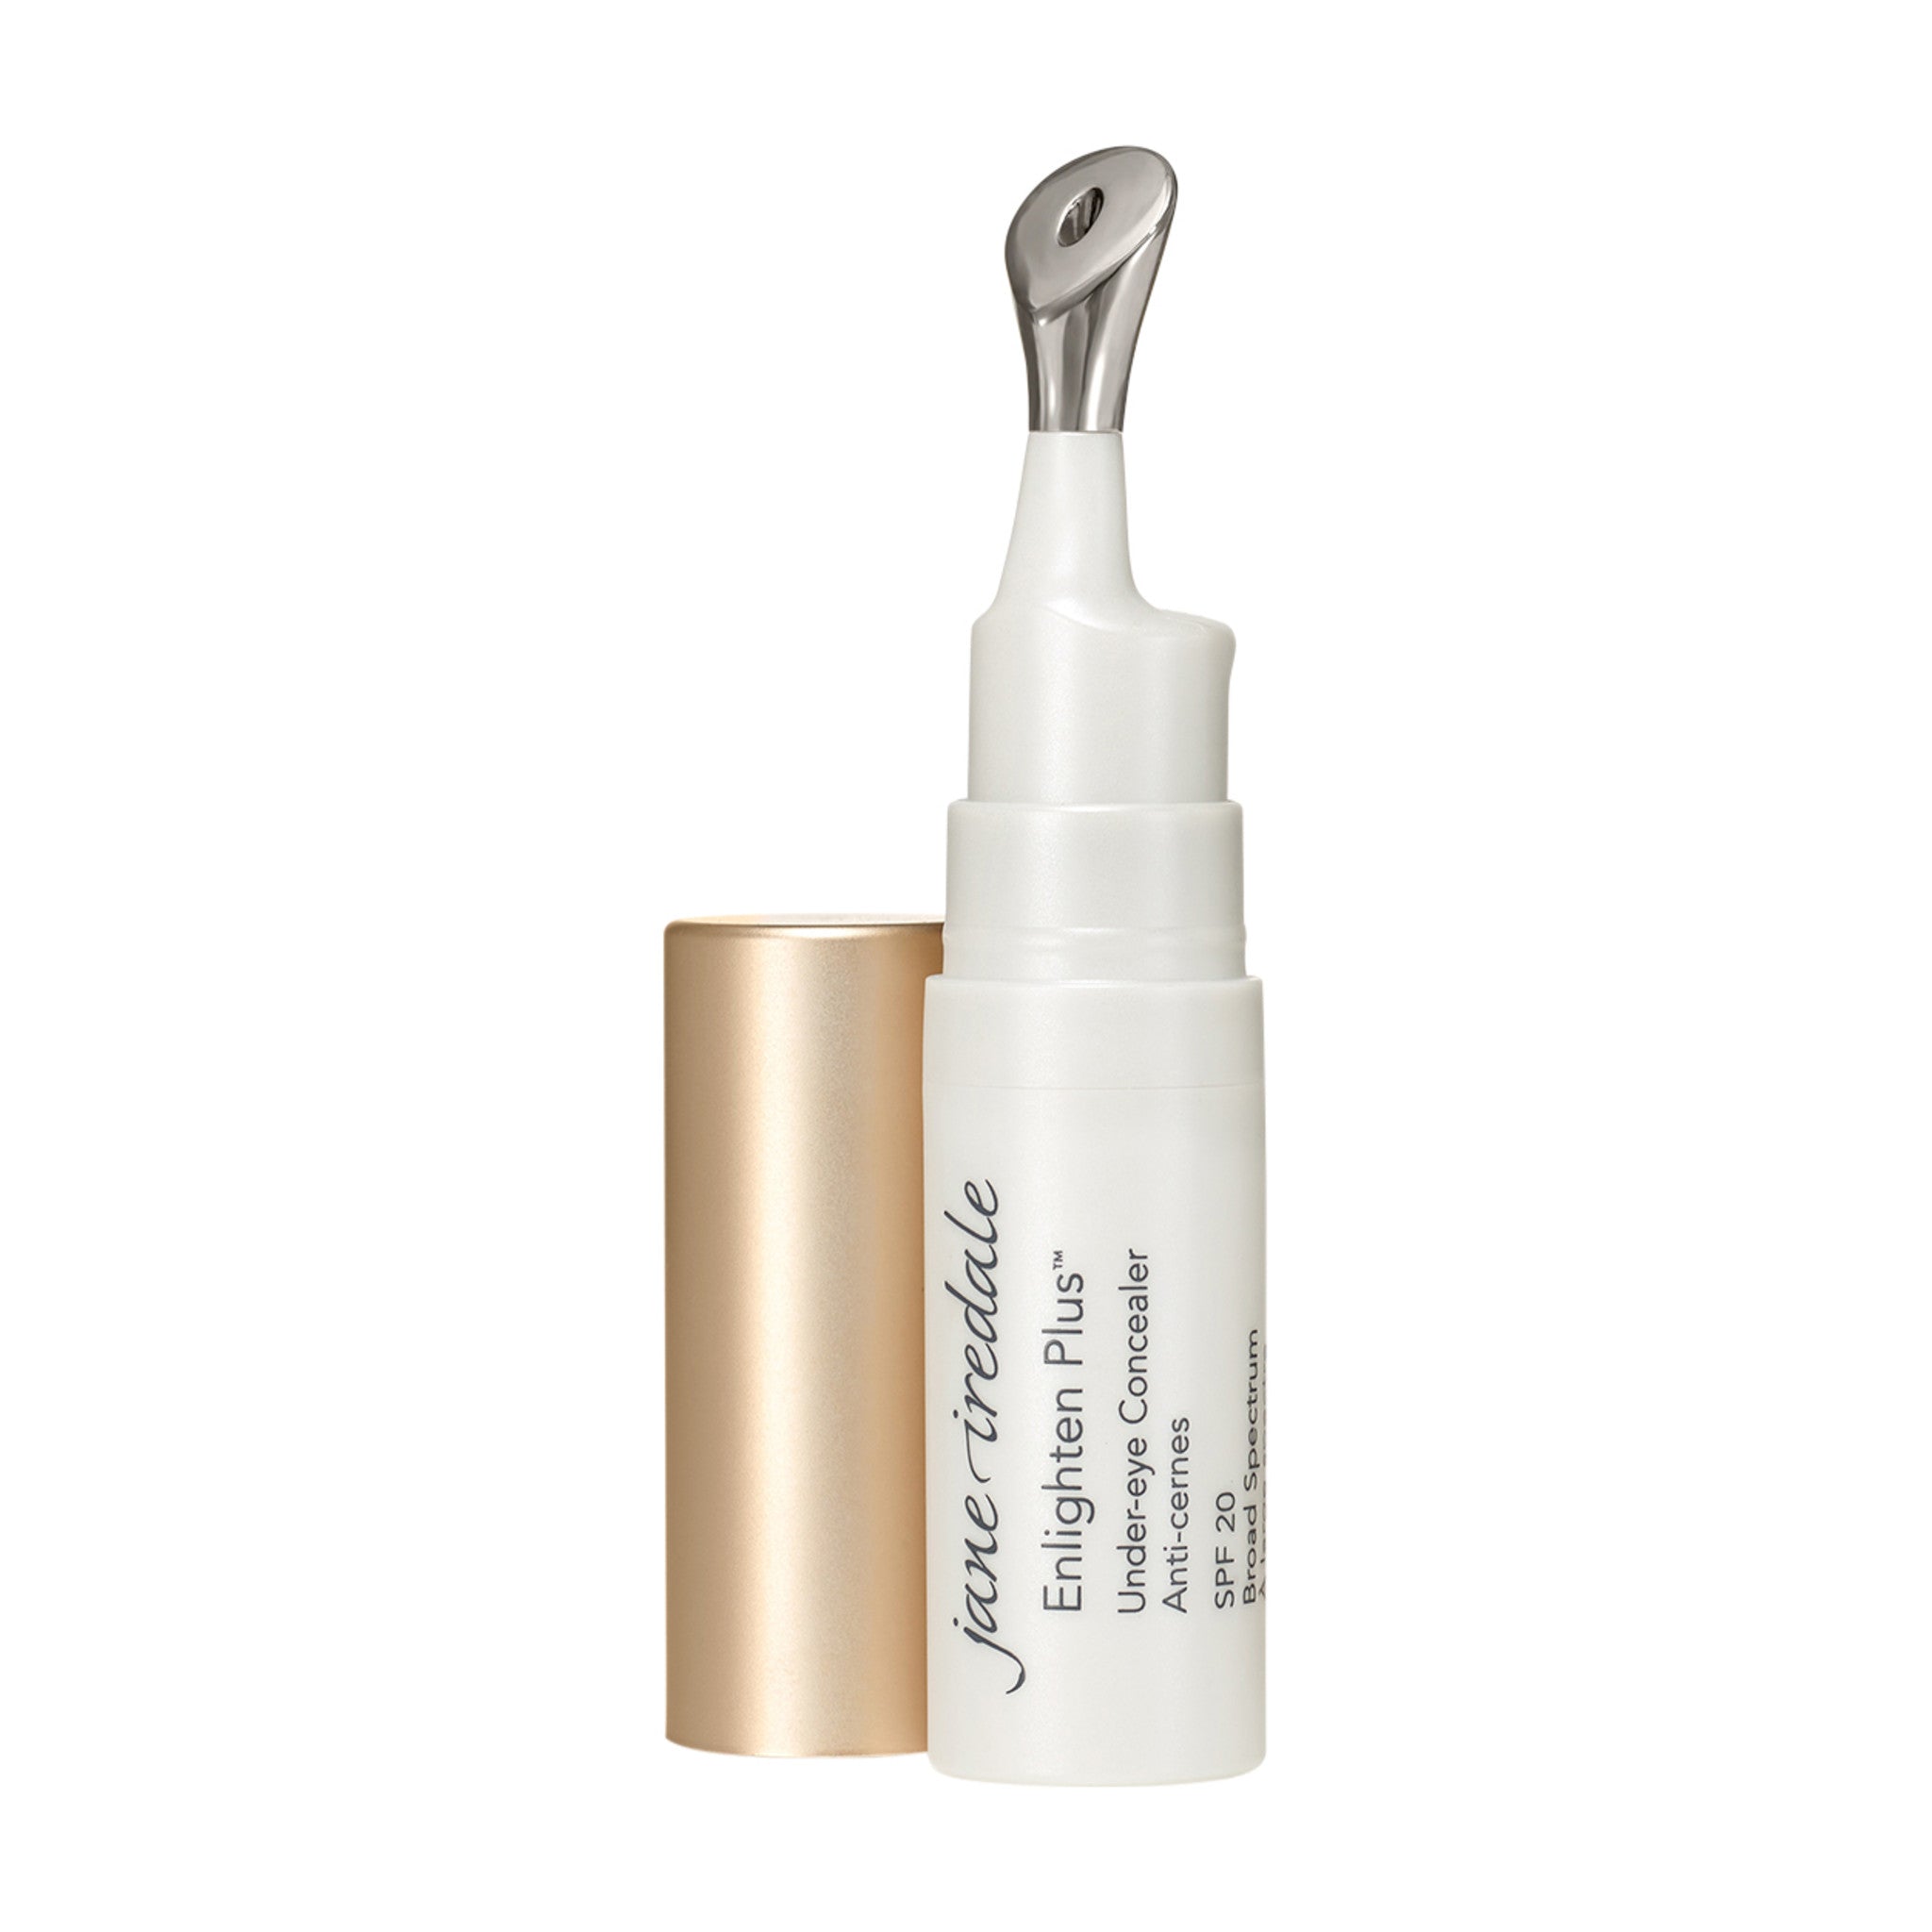 Jane Iredale Enlighten Plus Under-eye Concealer Color/Shade variant: No 3 main image. This product is for medium warm complexions